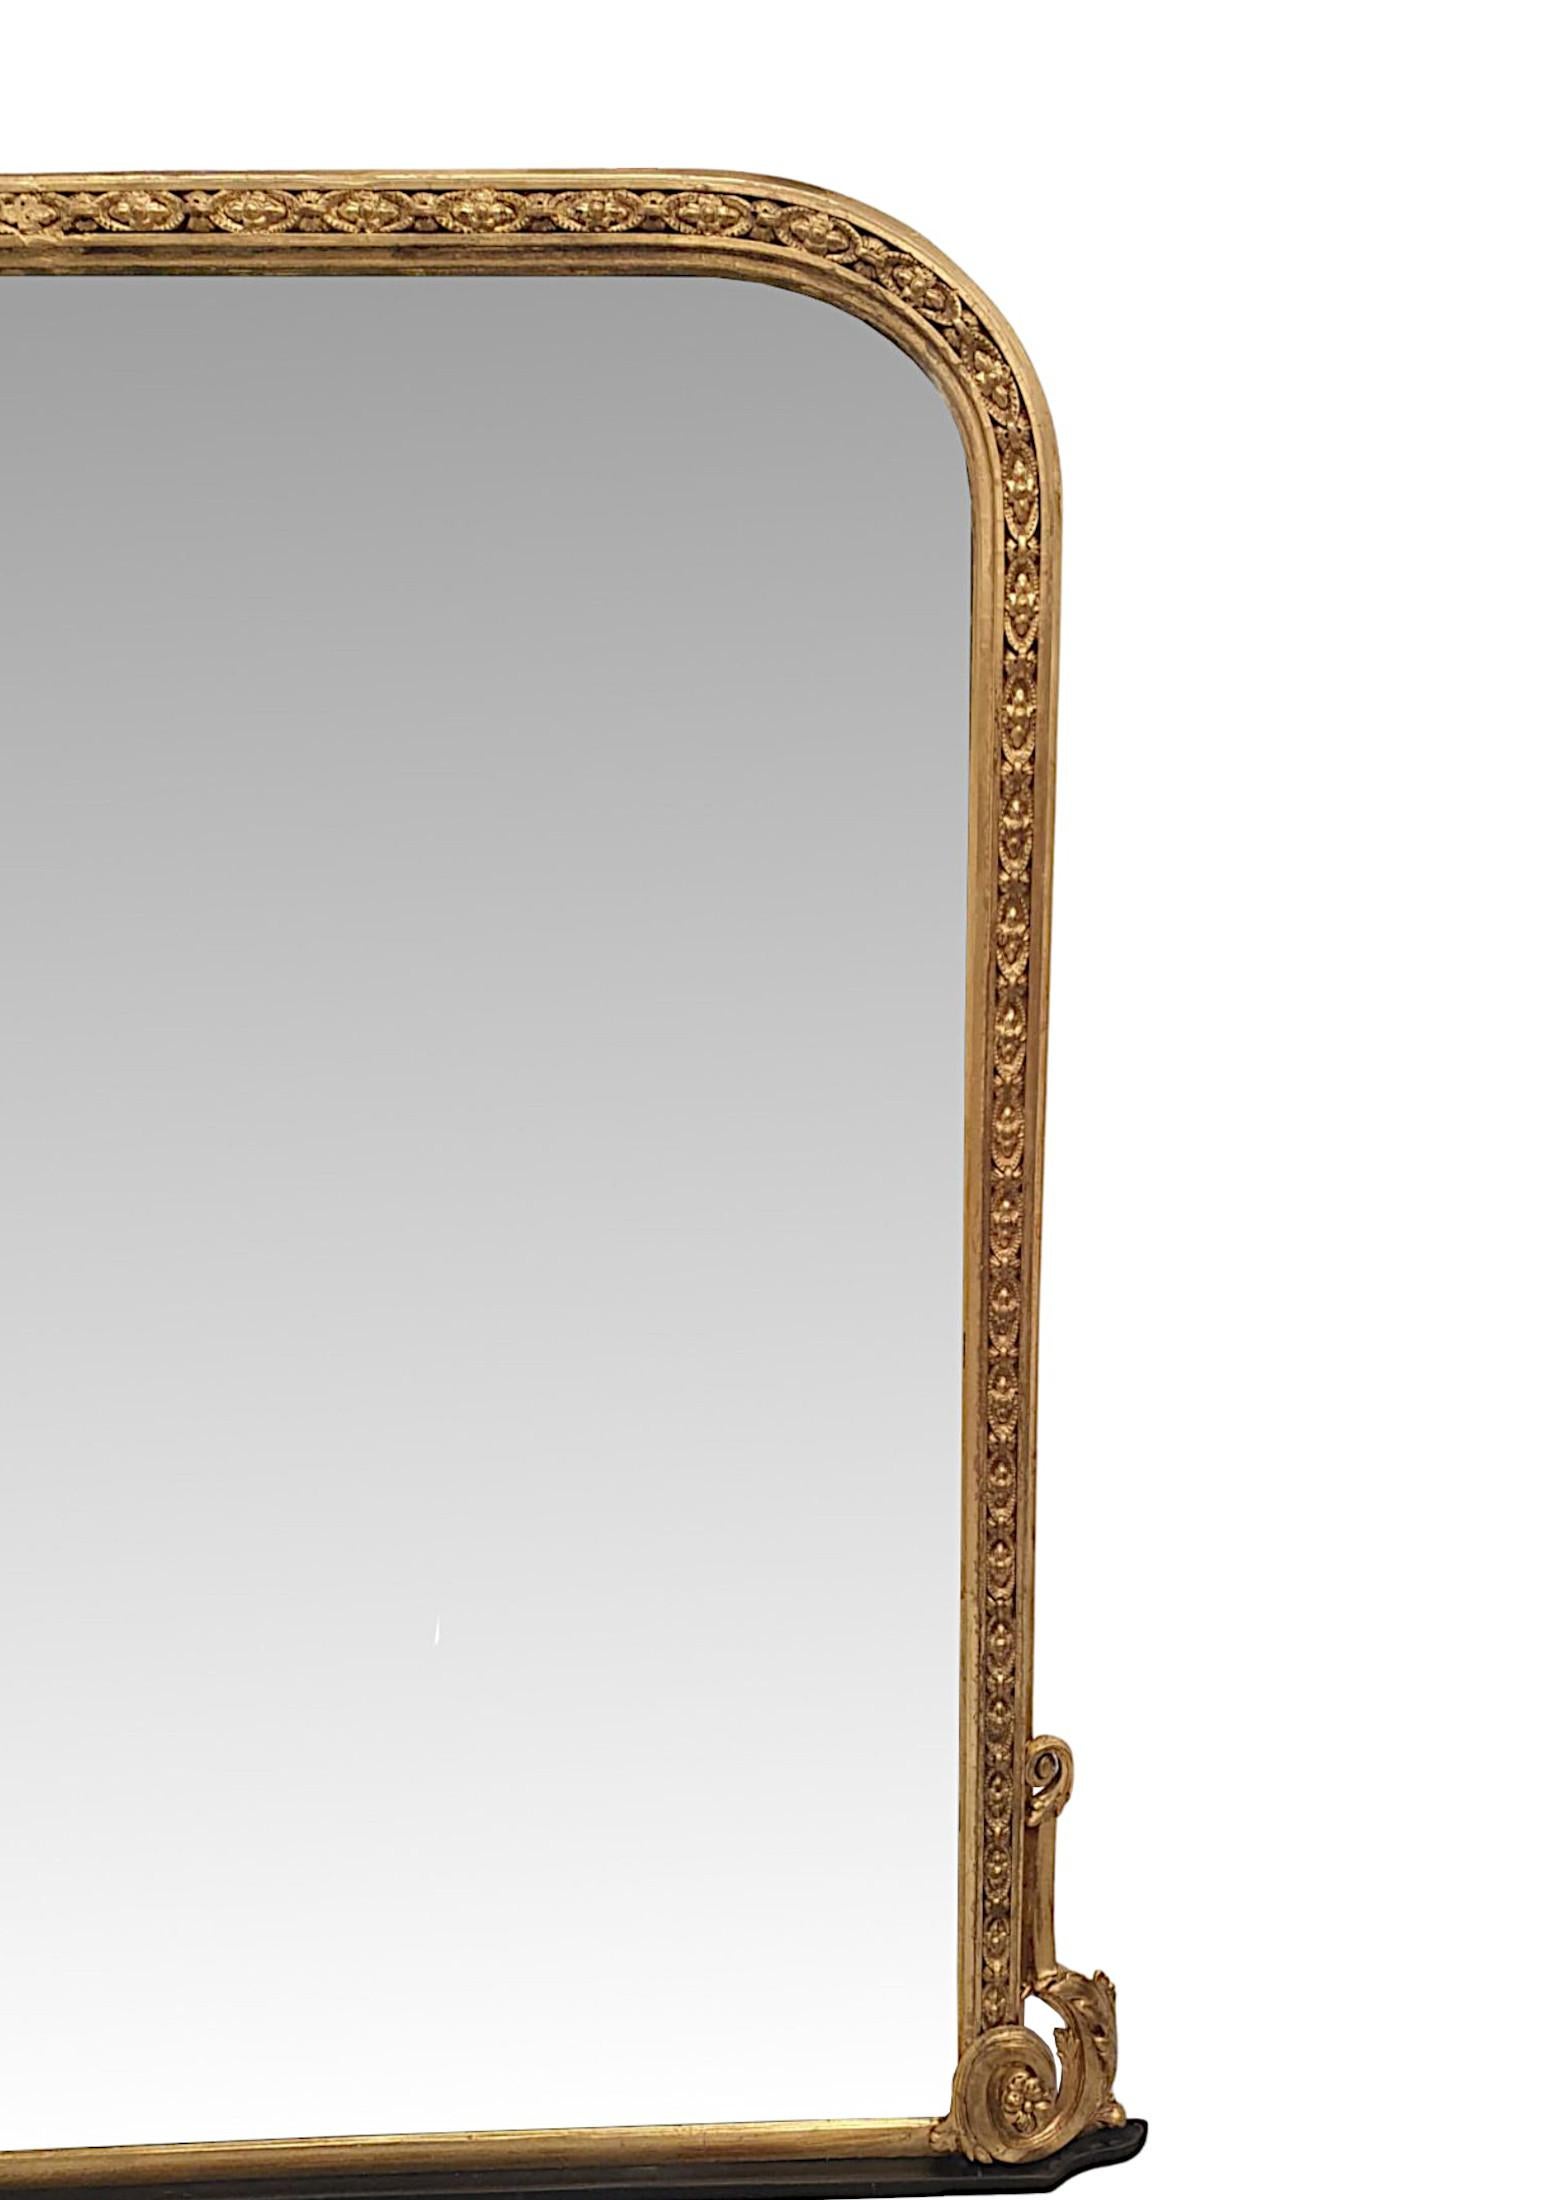 English A Gorgeous 19th Century Giltwood Overmantle Mirror For Sale